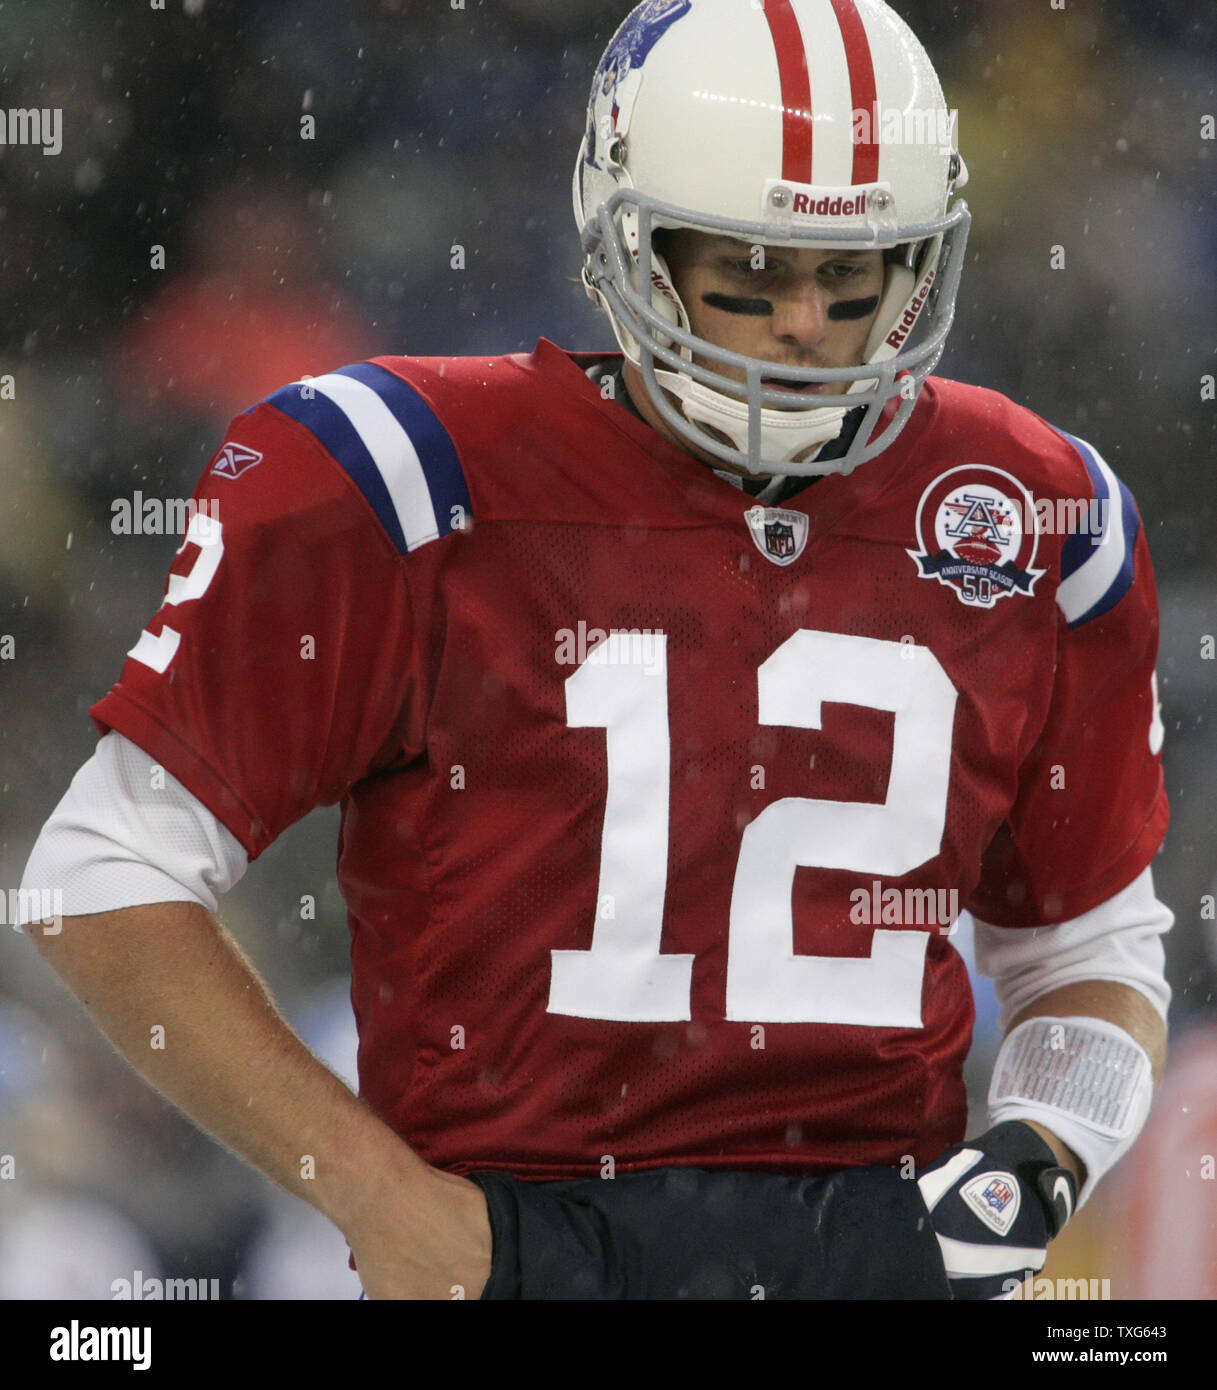 New England Patriots quarterback Tom Brady (12) heads off the field in the second quarter against the Tennessee Titans at Gillette Stadium in Foxboro, Massachusetts on October 18, 2009.     UPI/Matthew Healey Stock Photo